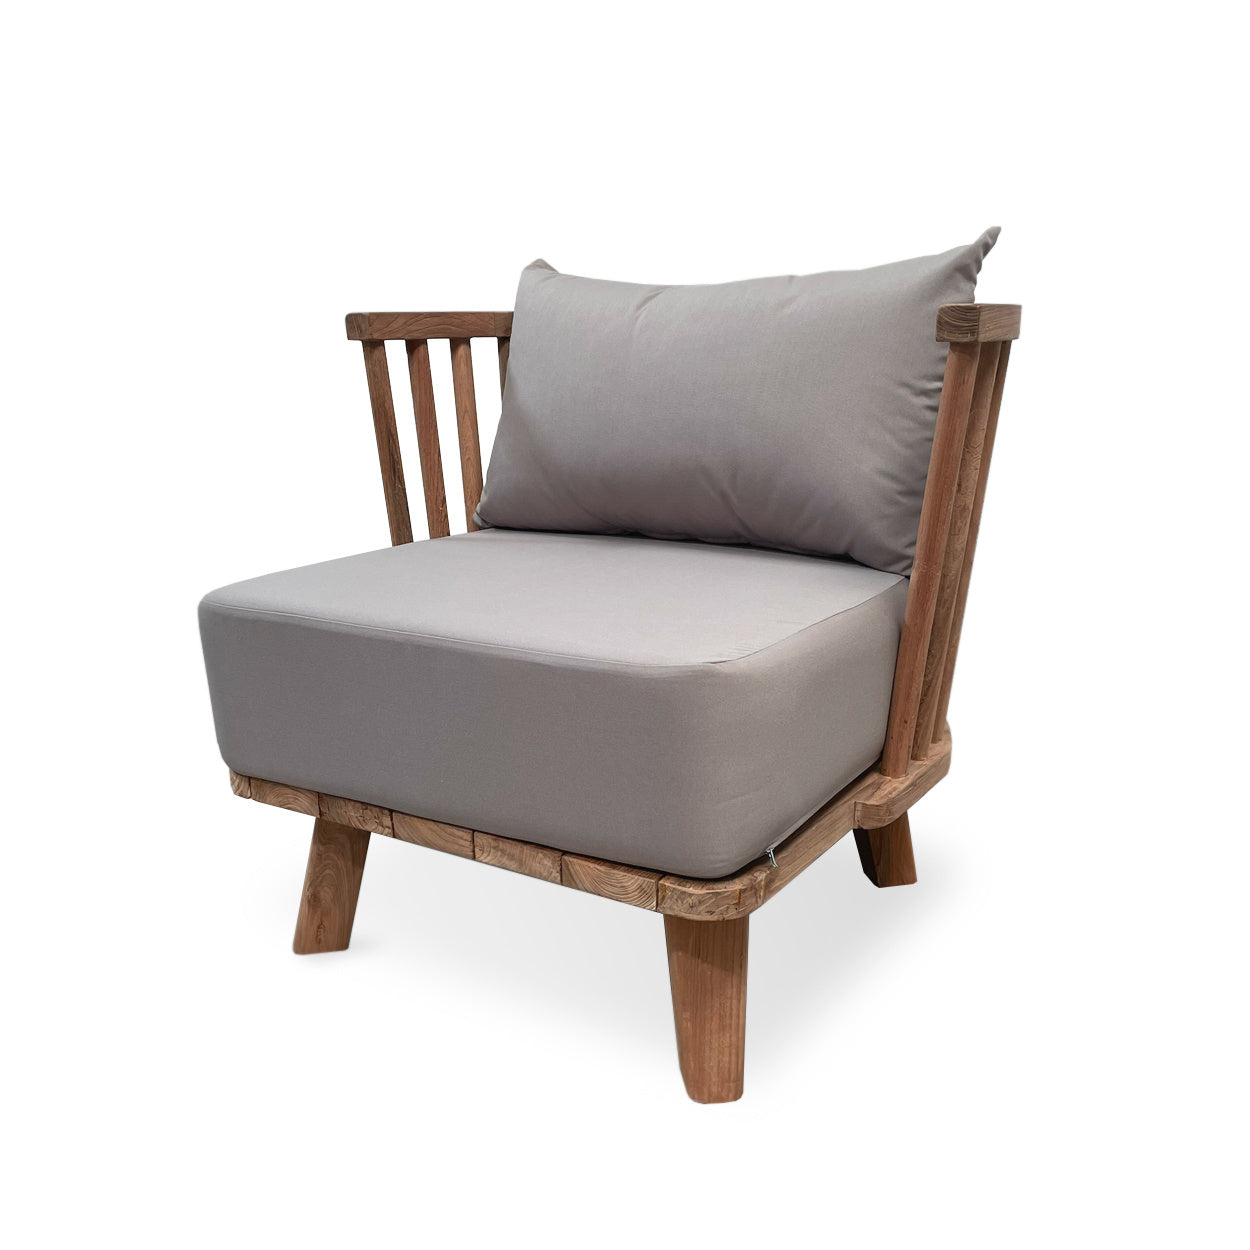 THE MALAWI Chaise une place - Naturel Beige